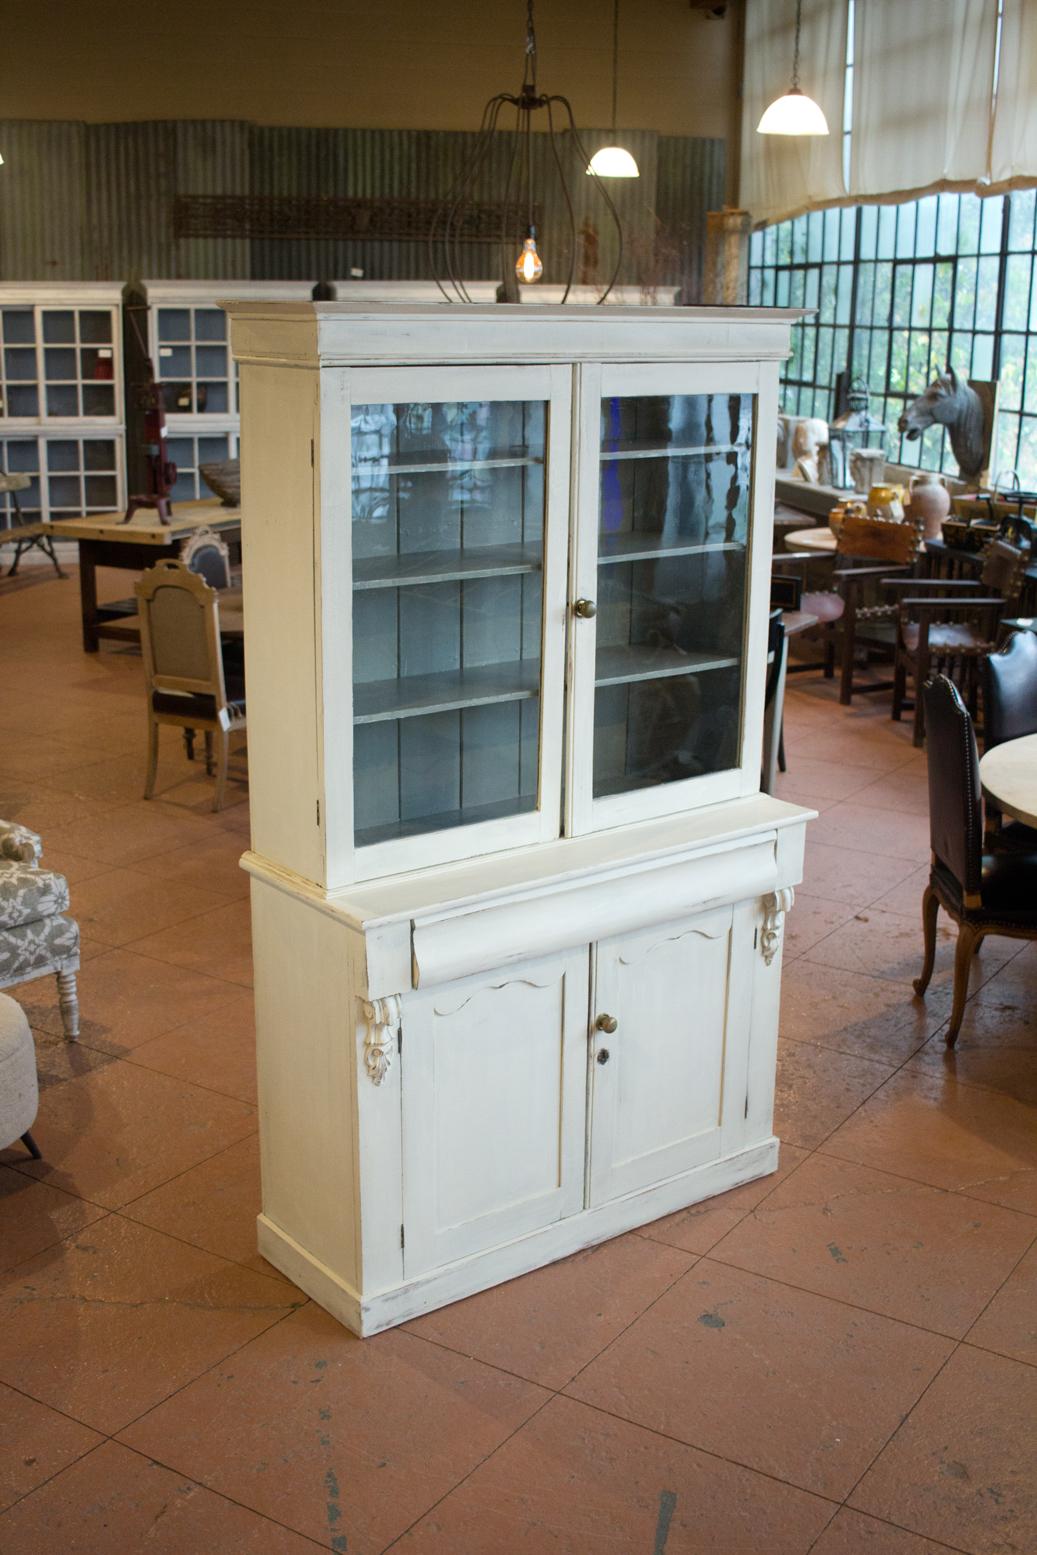 Victorian scraped back painted country dresser with original glass doors and brass hardware.